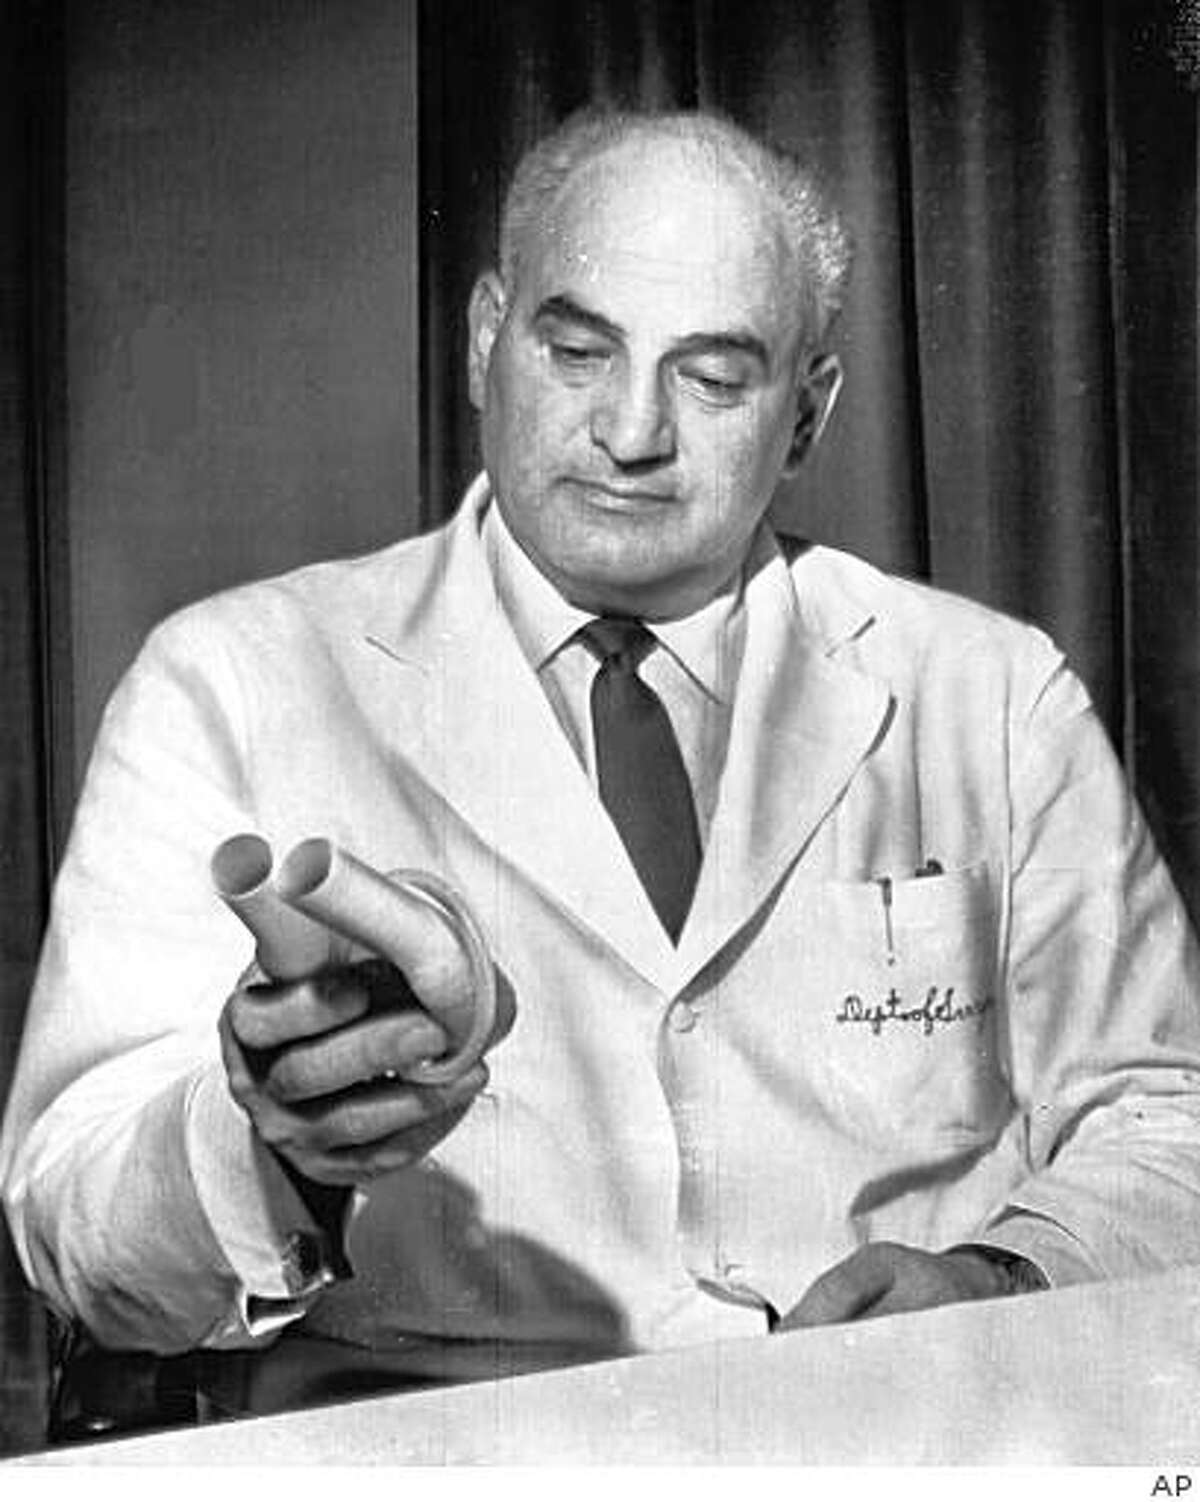 ** FILE ** In this May 23, 1966 file photo, American heart specialist Dr. Adrian Kantrowitz displays a mechanical auxillary heart, like the one he implanted in Mrs. Louise Ceraso, in a New York hospital, six days previous, during a news conference in New York. Dr. Kantrowitz, who performed the first human heart transplant in the United States in 1967 and pioneered development of mechanical devices to prolong the life of patients with heart failure, died in Ann Arbor, Mich., Friday, Nov. 14, 2008. He was 90. (AP Photo, File)